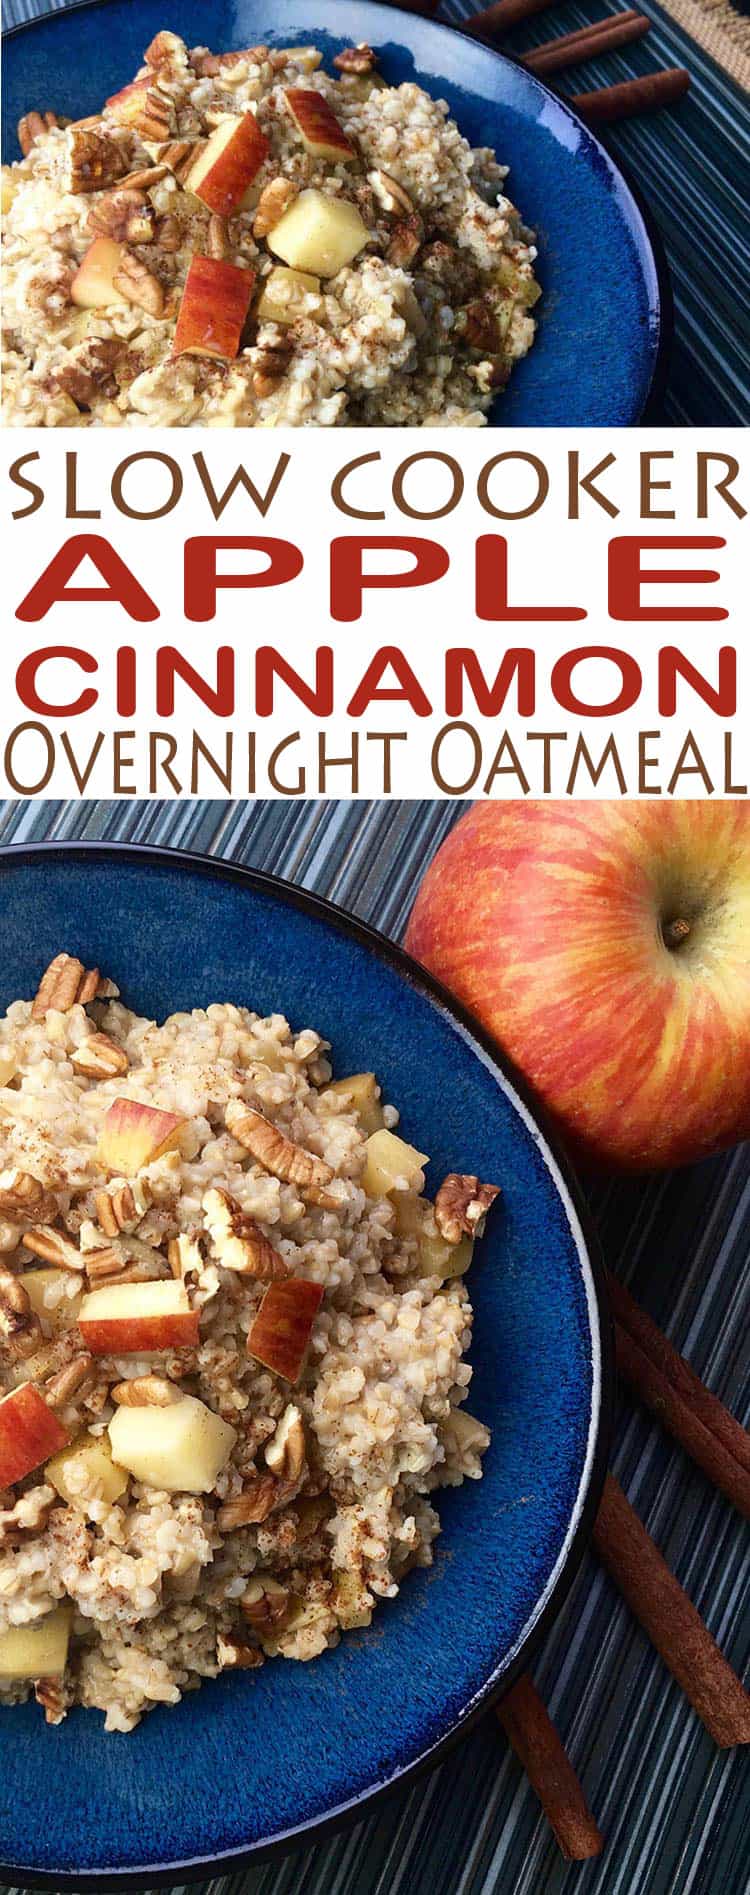 Learn how to make this delicious slow cooker overnight oatmeal recipe. Apple Cinnamon Overnight Oatmeal is ready for breakfast.